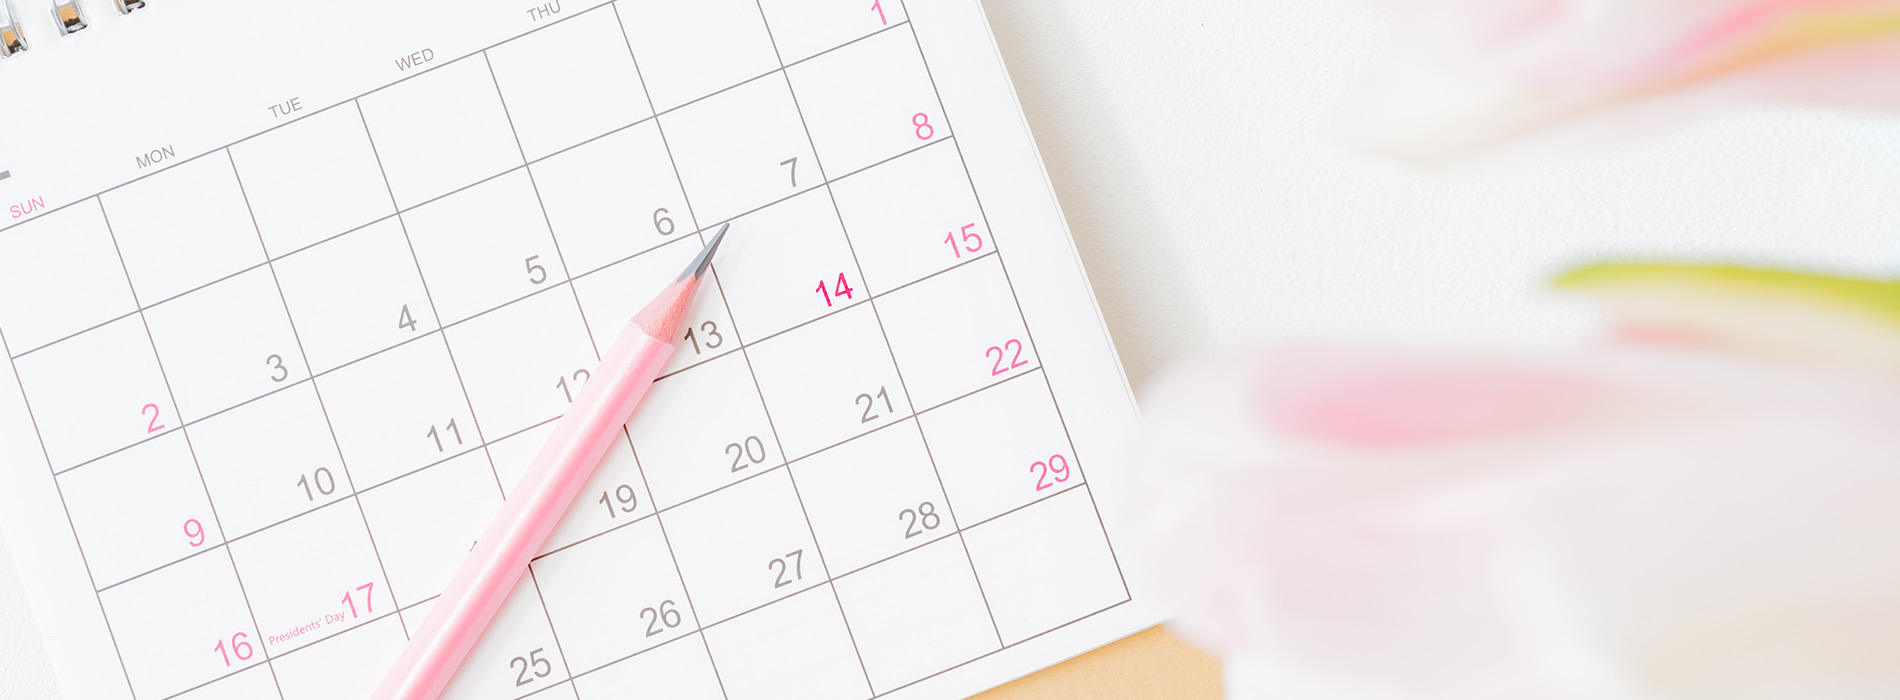 A pink pen on top of a paper calendar with the month of May visible, placed against a blurred background.